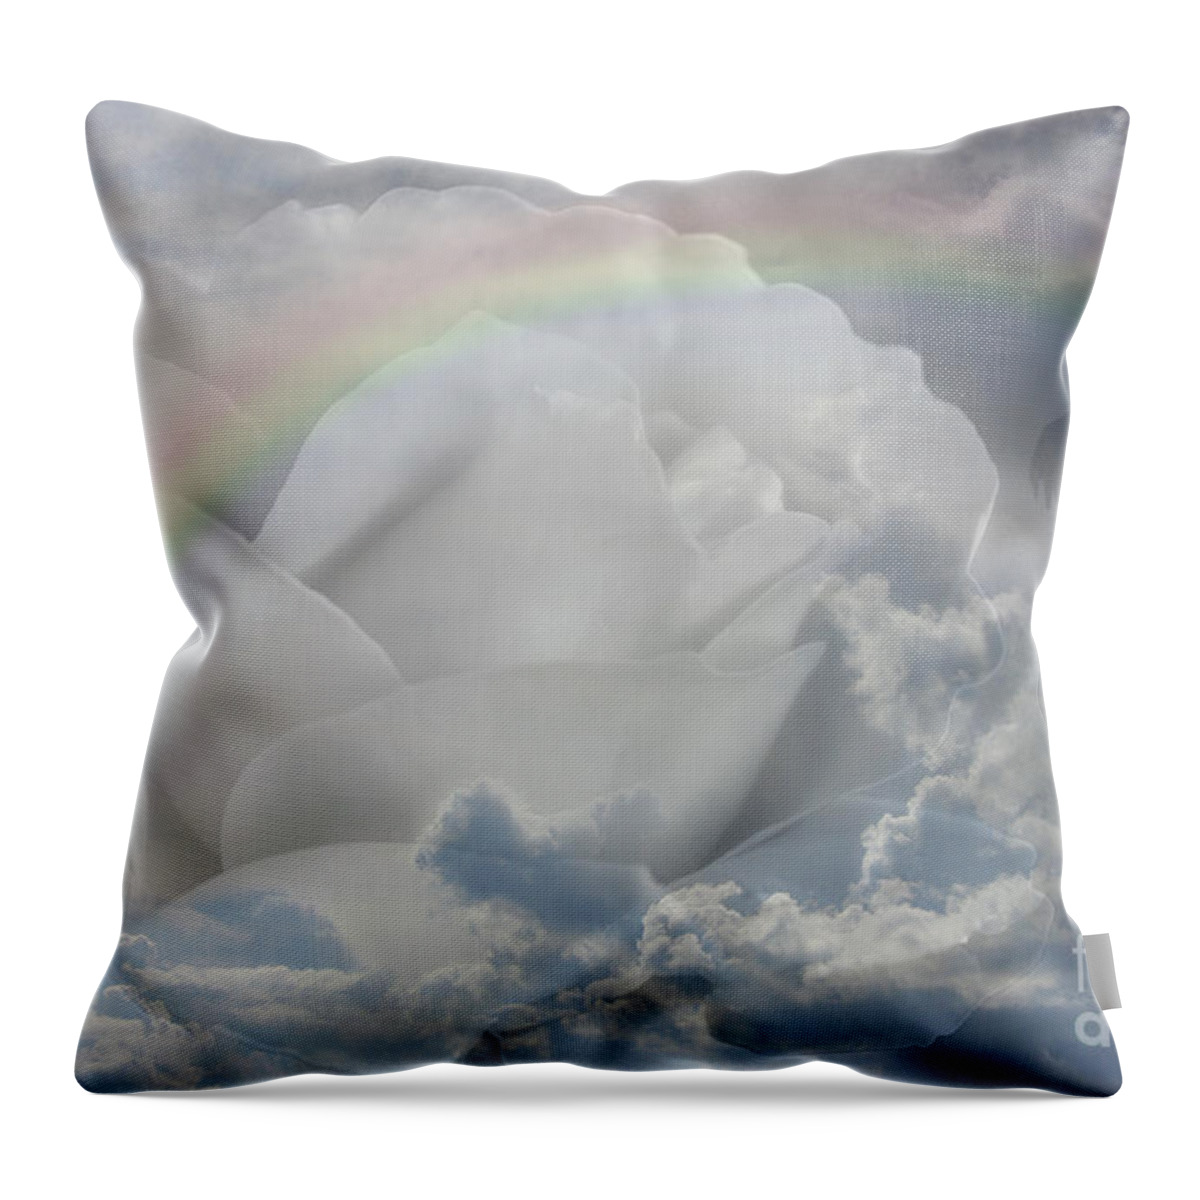 Photograph Throw Pillow featuring the photograph Sweet Dreams Baby by Vicki Pelham